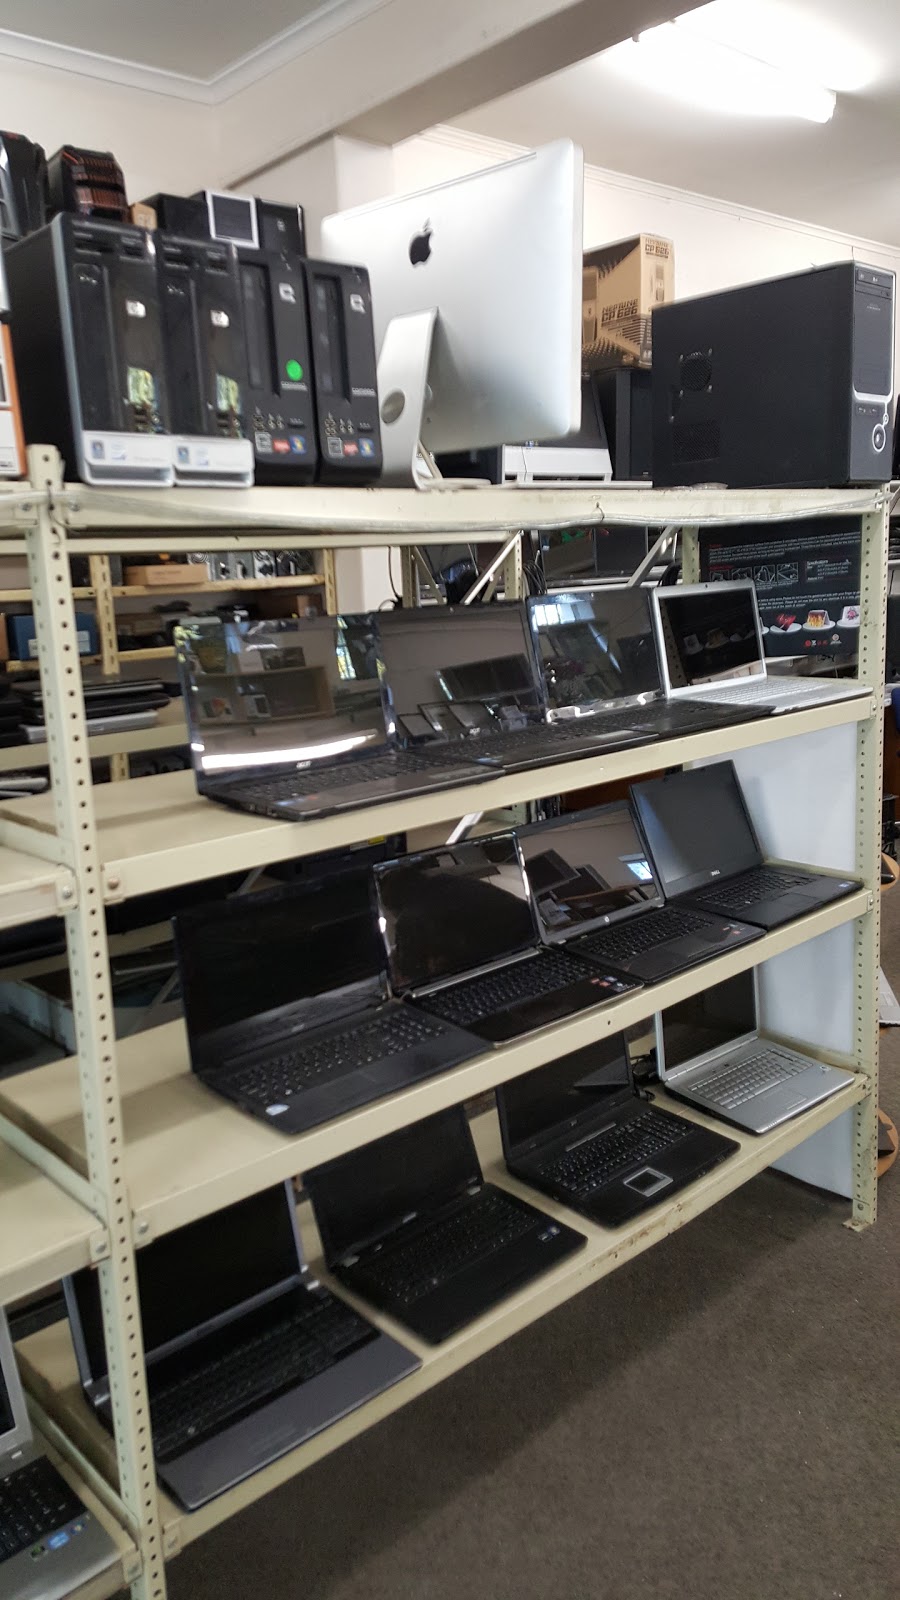 Computer Recyclers Adelaide | electronics store | 13 Durand Terrace, Enfield SA 5085, Australia | 0883494844 OR +61 8 8349 4844